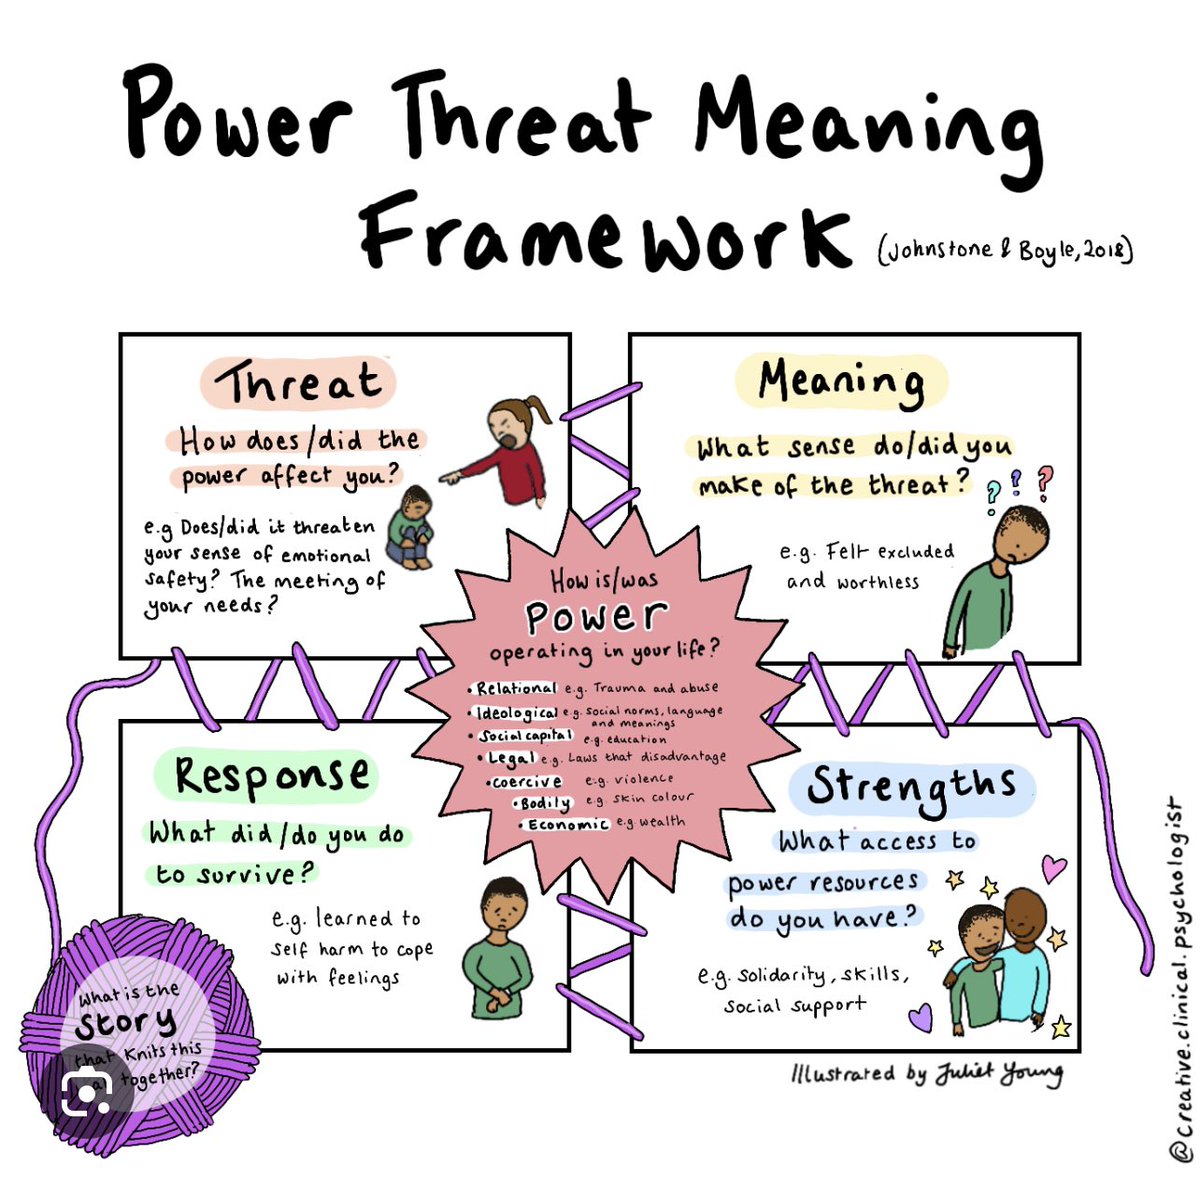 Privileged to be involved in the development of new & exciting projects centering the @PTMFramework #CultureChange #PTMFramework Brilliant illustration by @Juliet_Young1